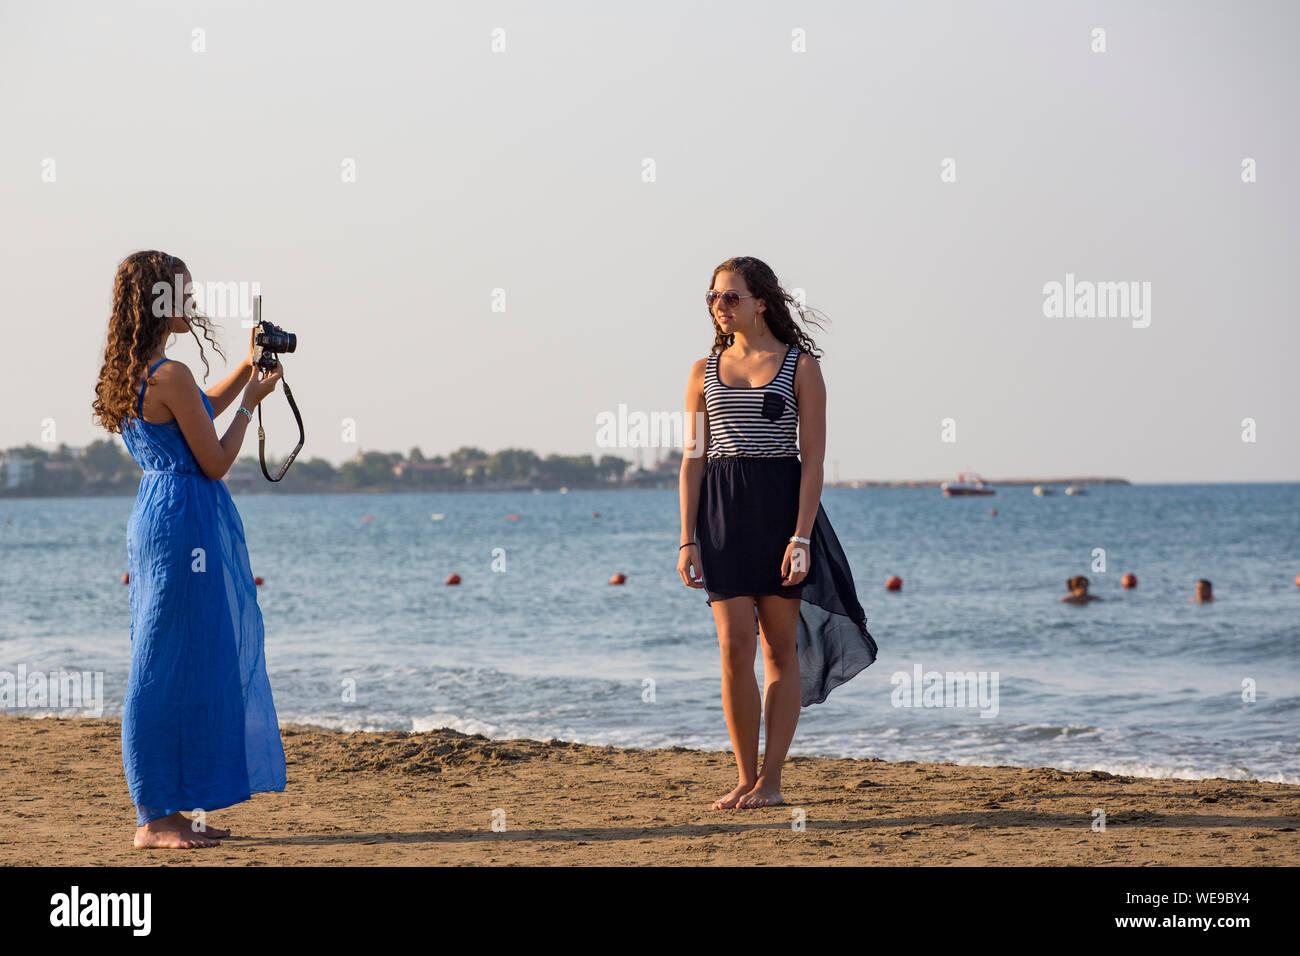 A young women takes a holiday photograph of another girl on a beach Stock Photo